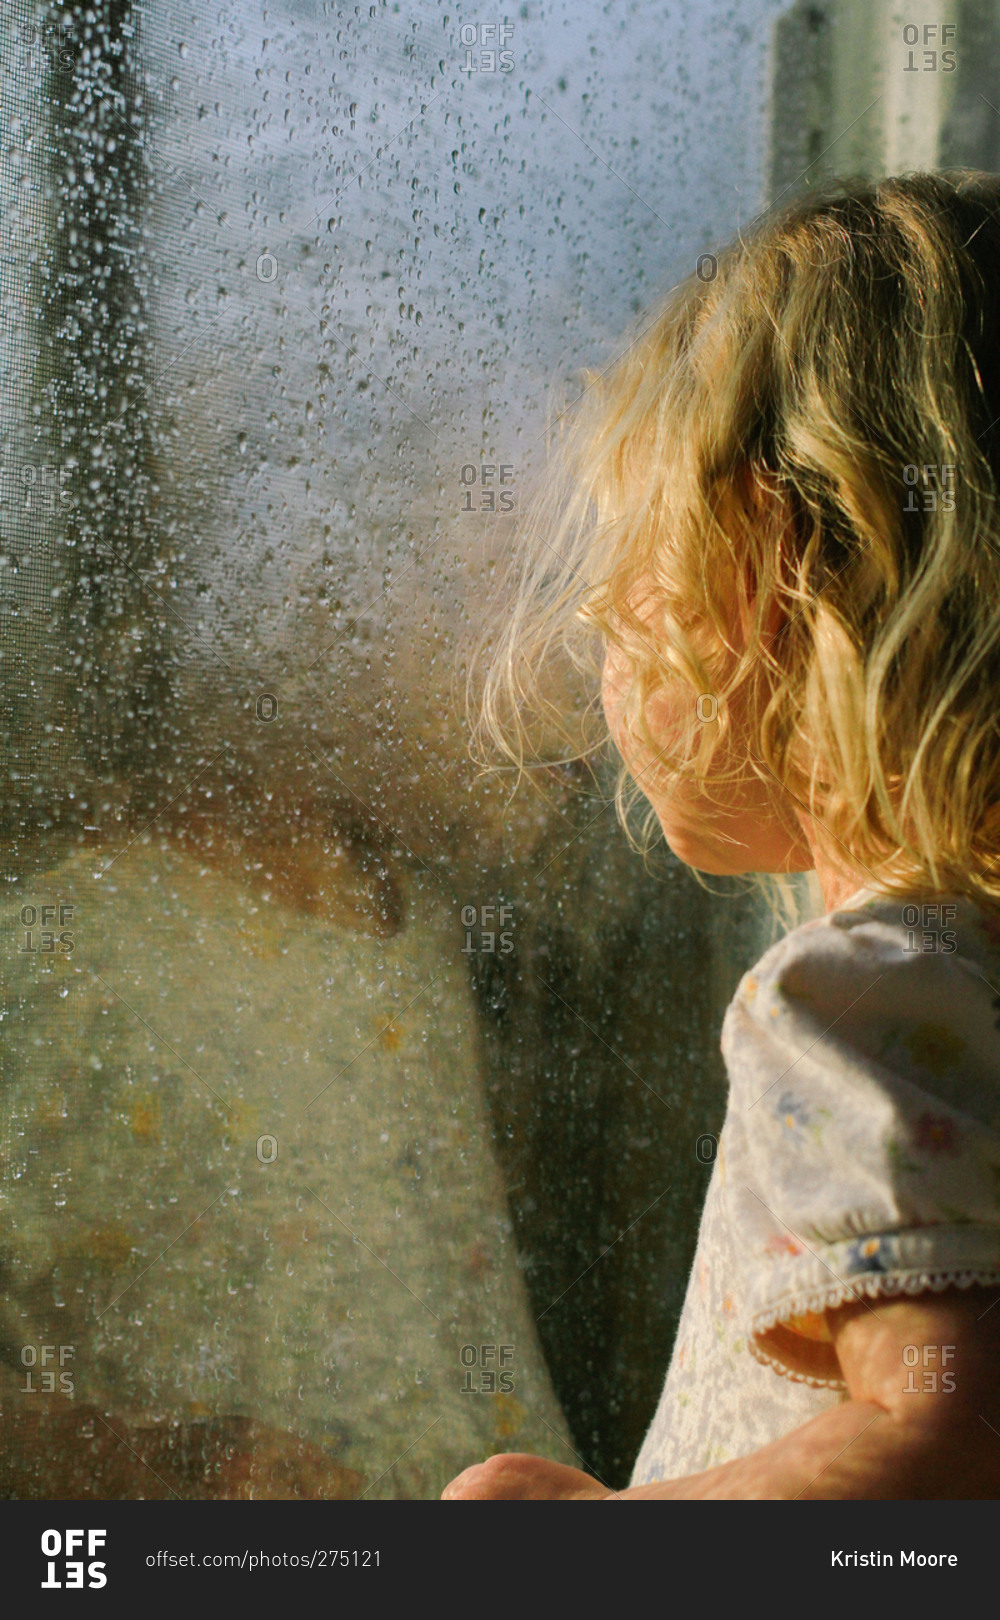 Girl peering out window while it rains